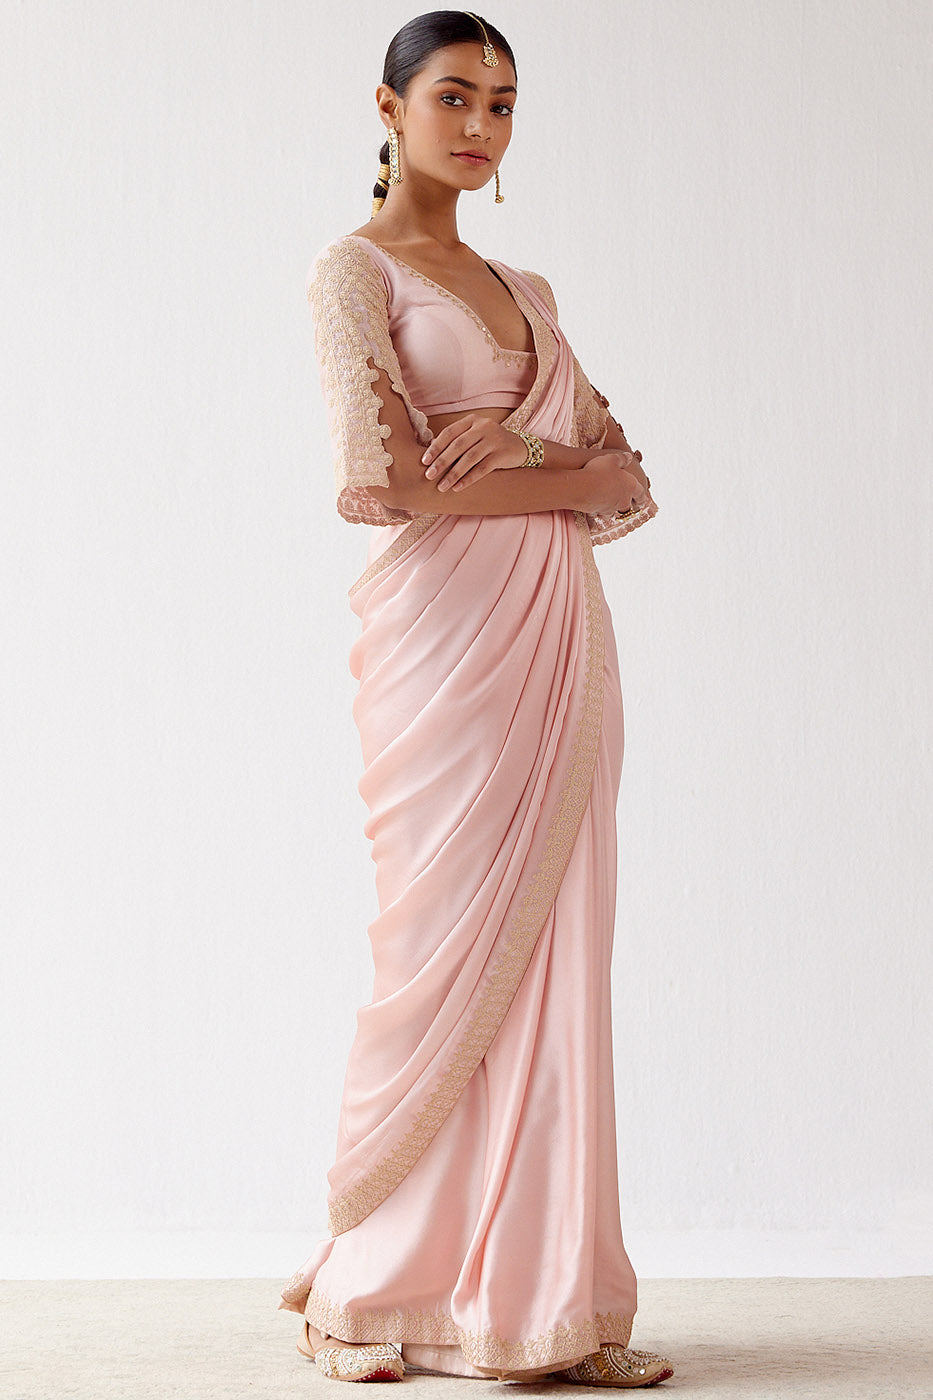 Shop Blush Pink Pre-Draped Saree Set for Women Online from India's